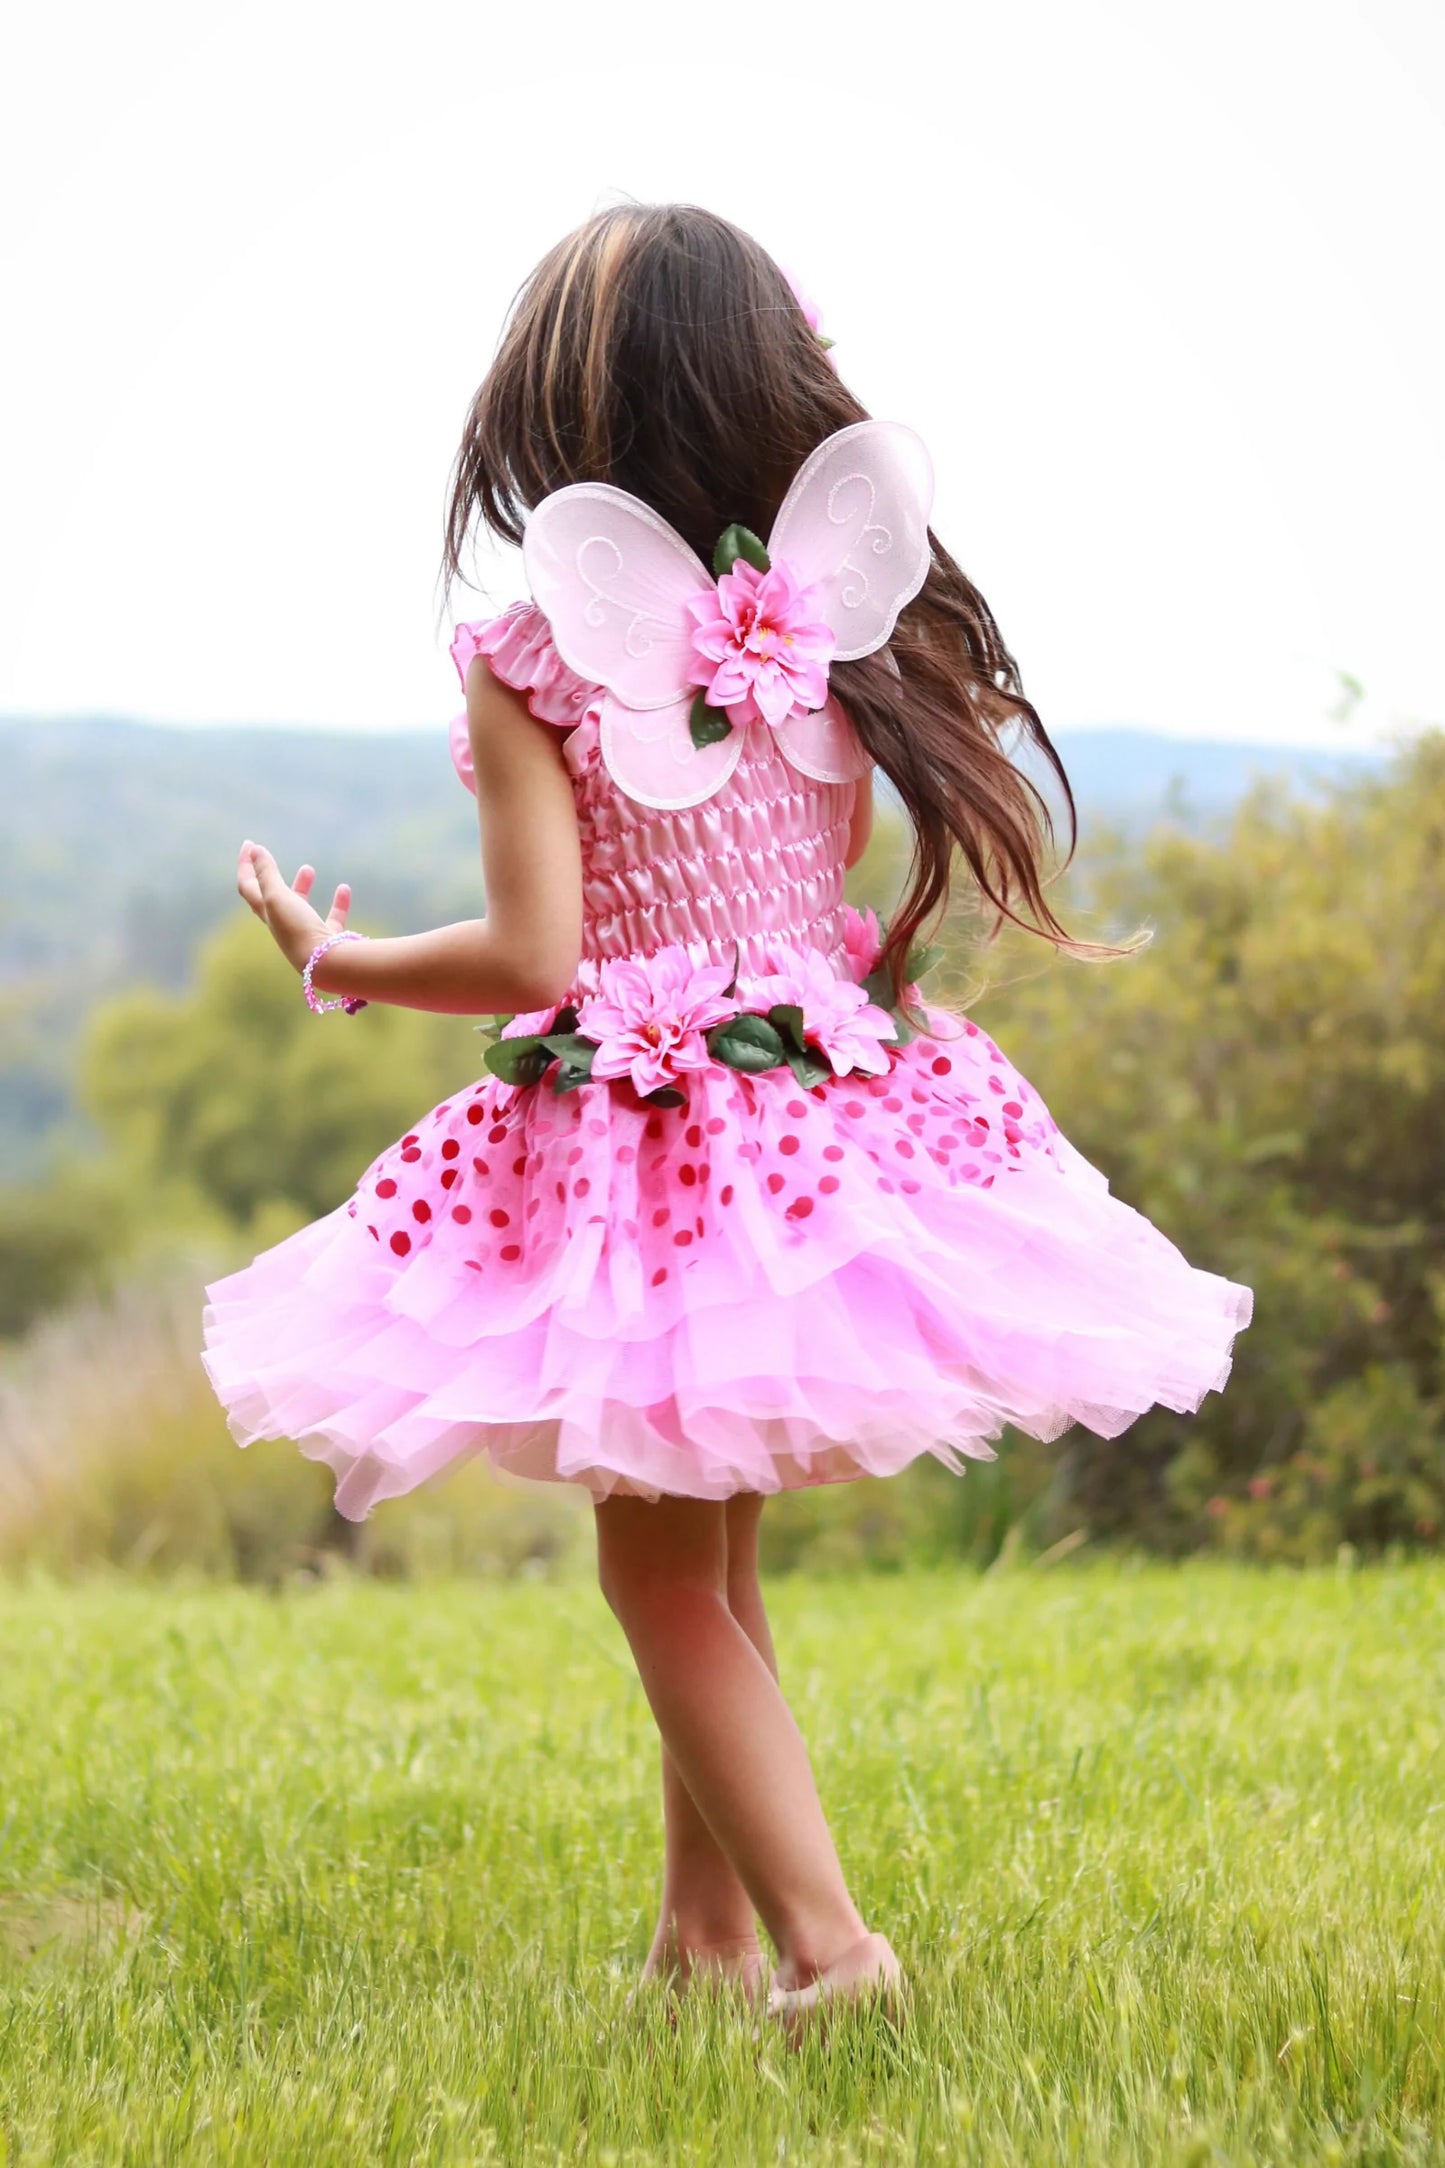 Dress Up - Fairy Blooms Deluxe Dress (Pink)